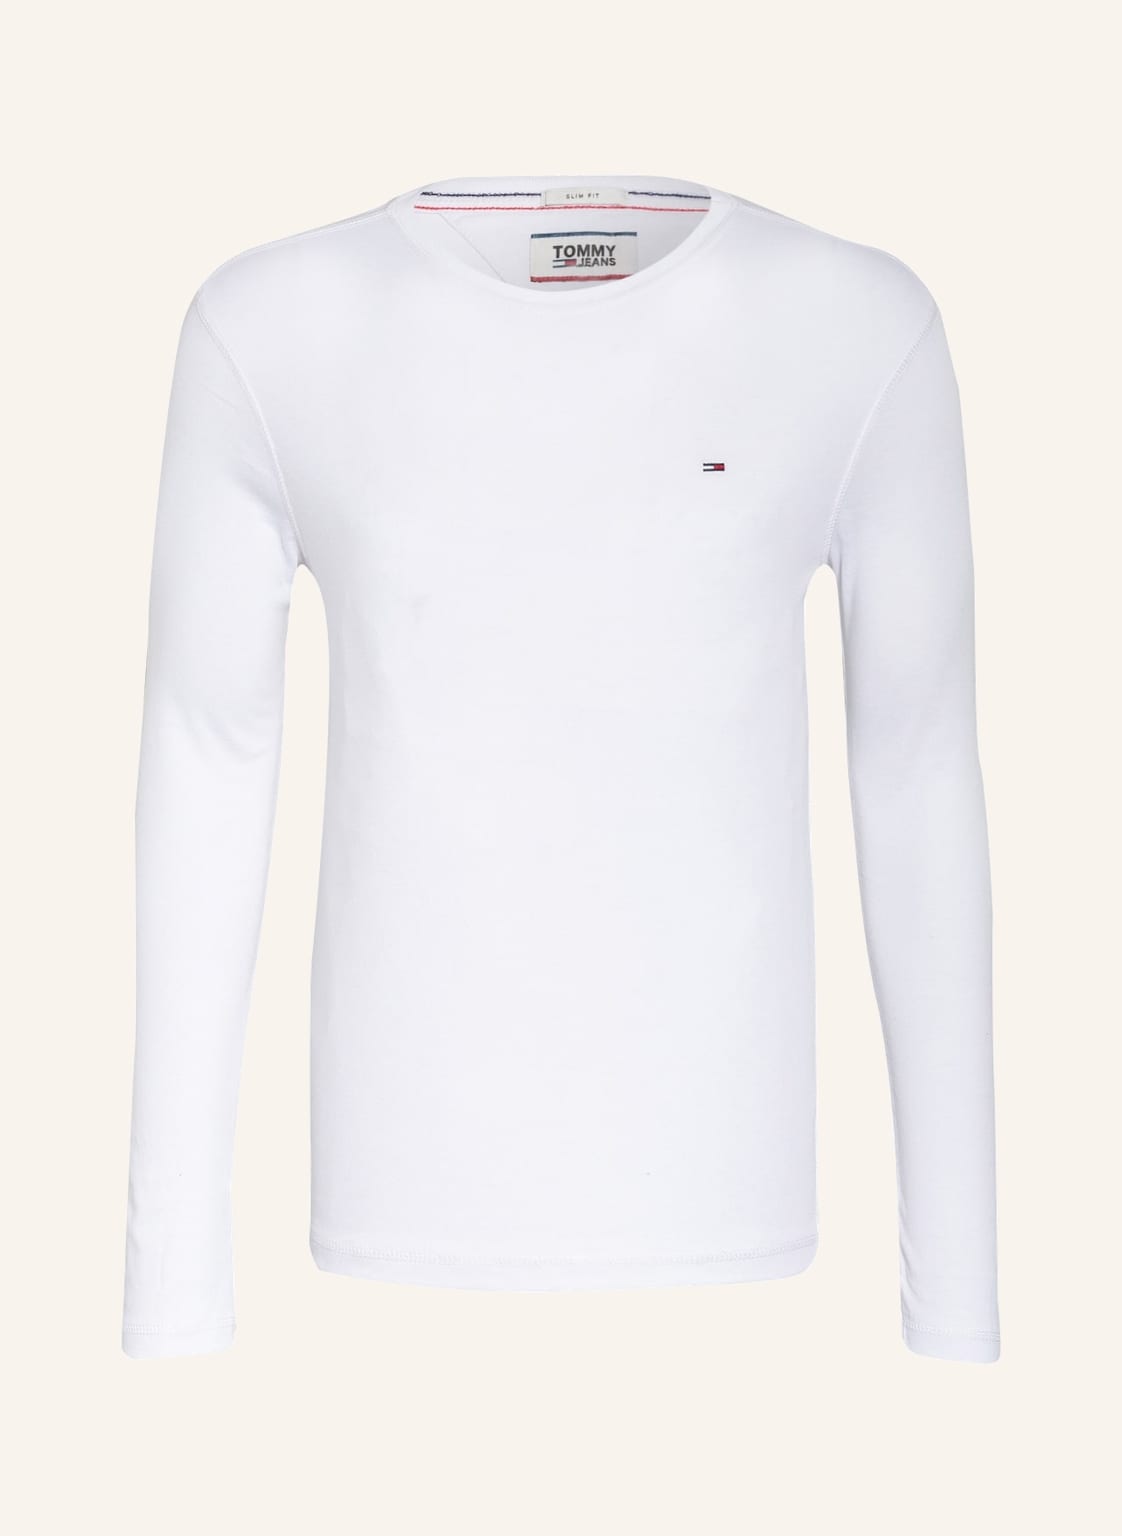 Tommy Jeans Longsleeve weiss von Tommy Jeans